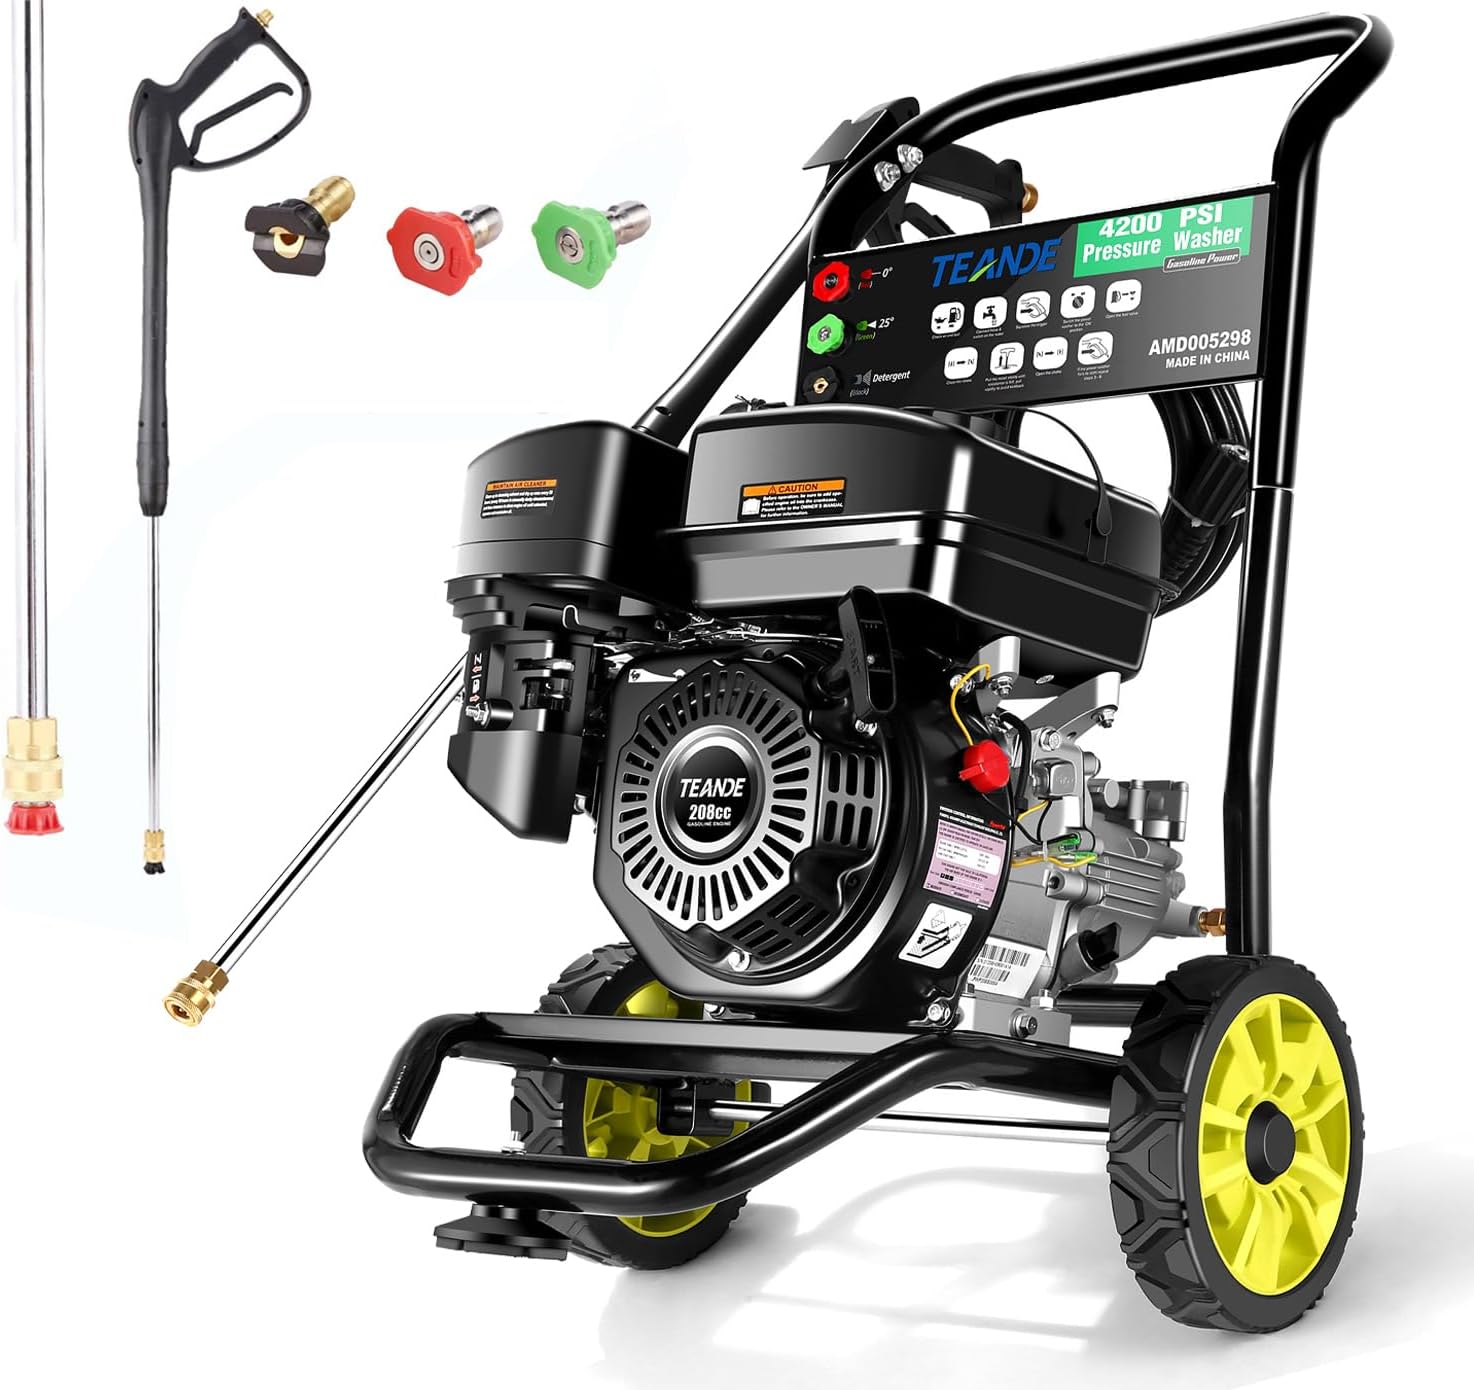 TEANDE 4200PSI Gas Pressure Washer, 3 GPM Commercial [...]